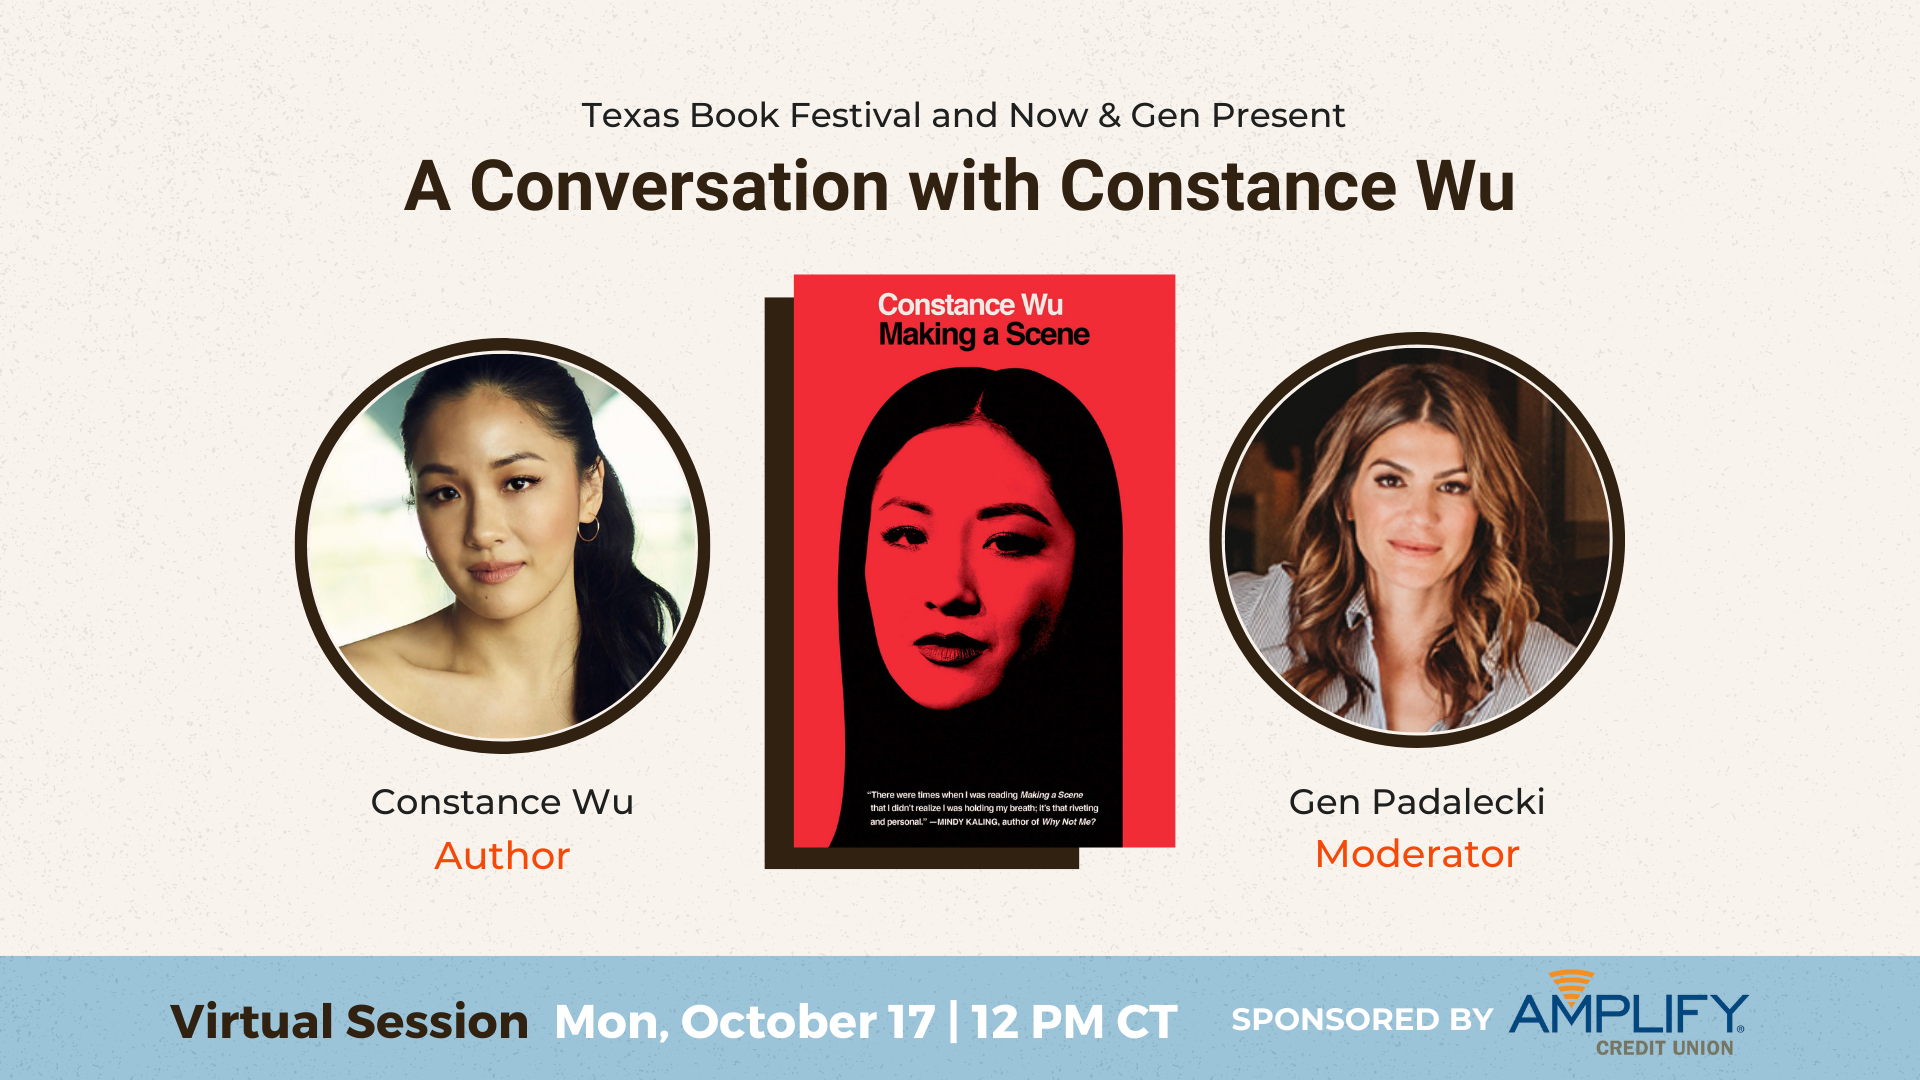 MAKING A SCENE: A Conversation with Constance Wu & Gen Padalecki